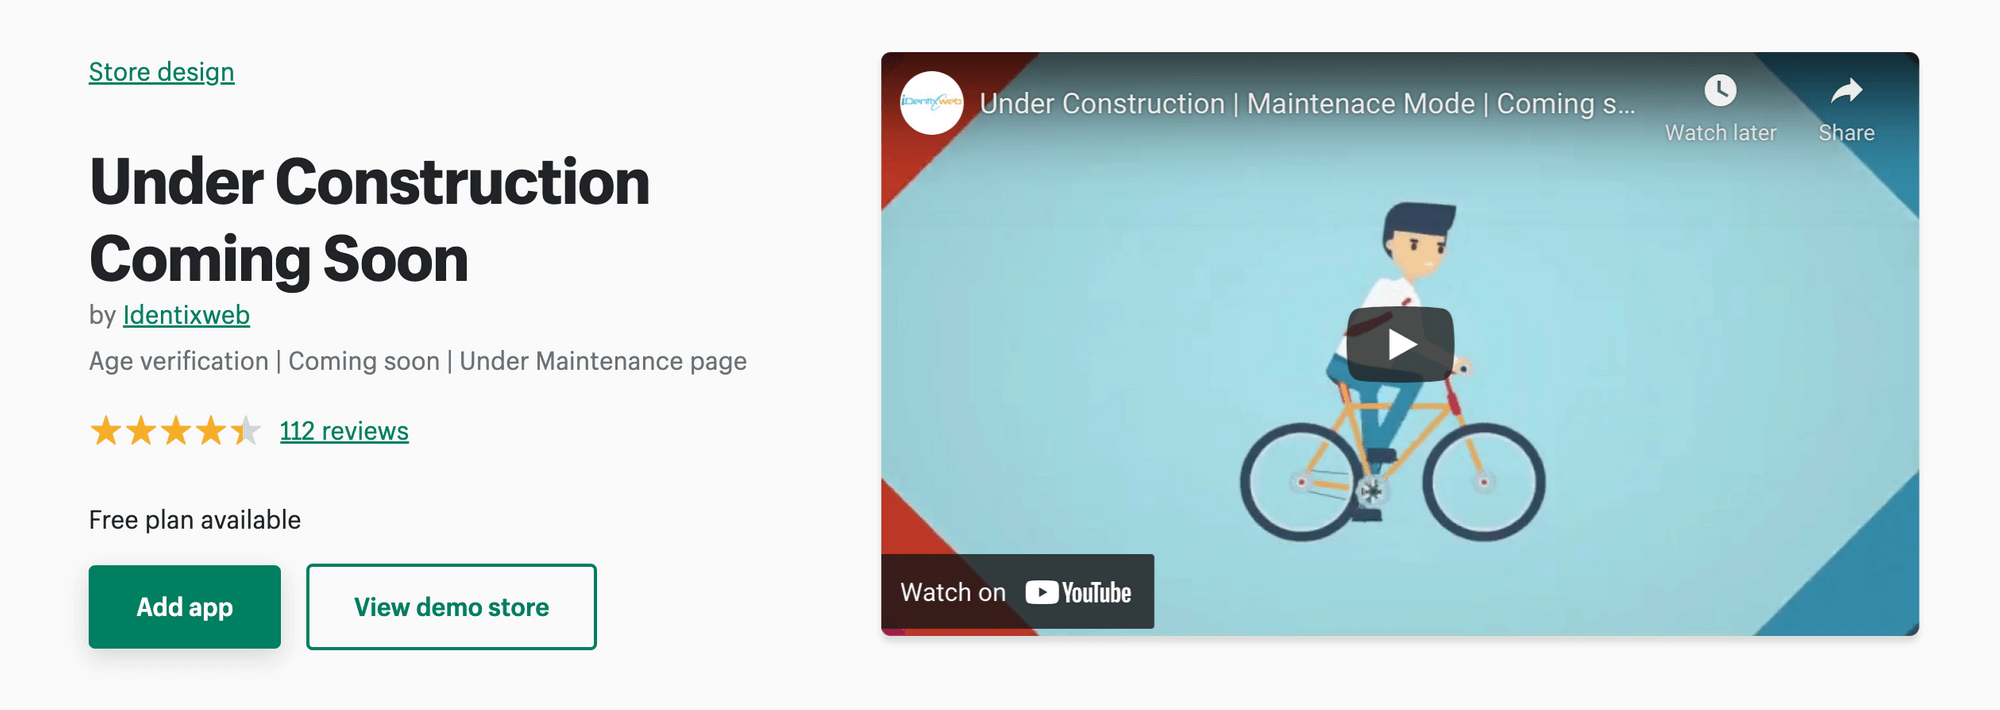 Under Contruction Coming Soon- Shopify App Store